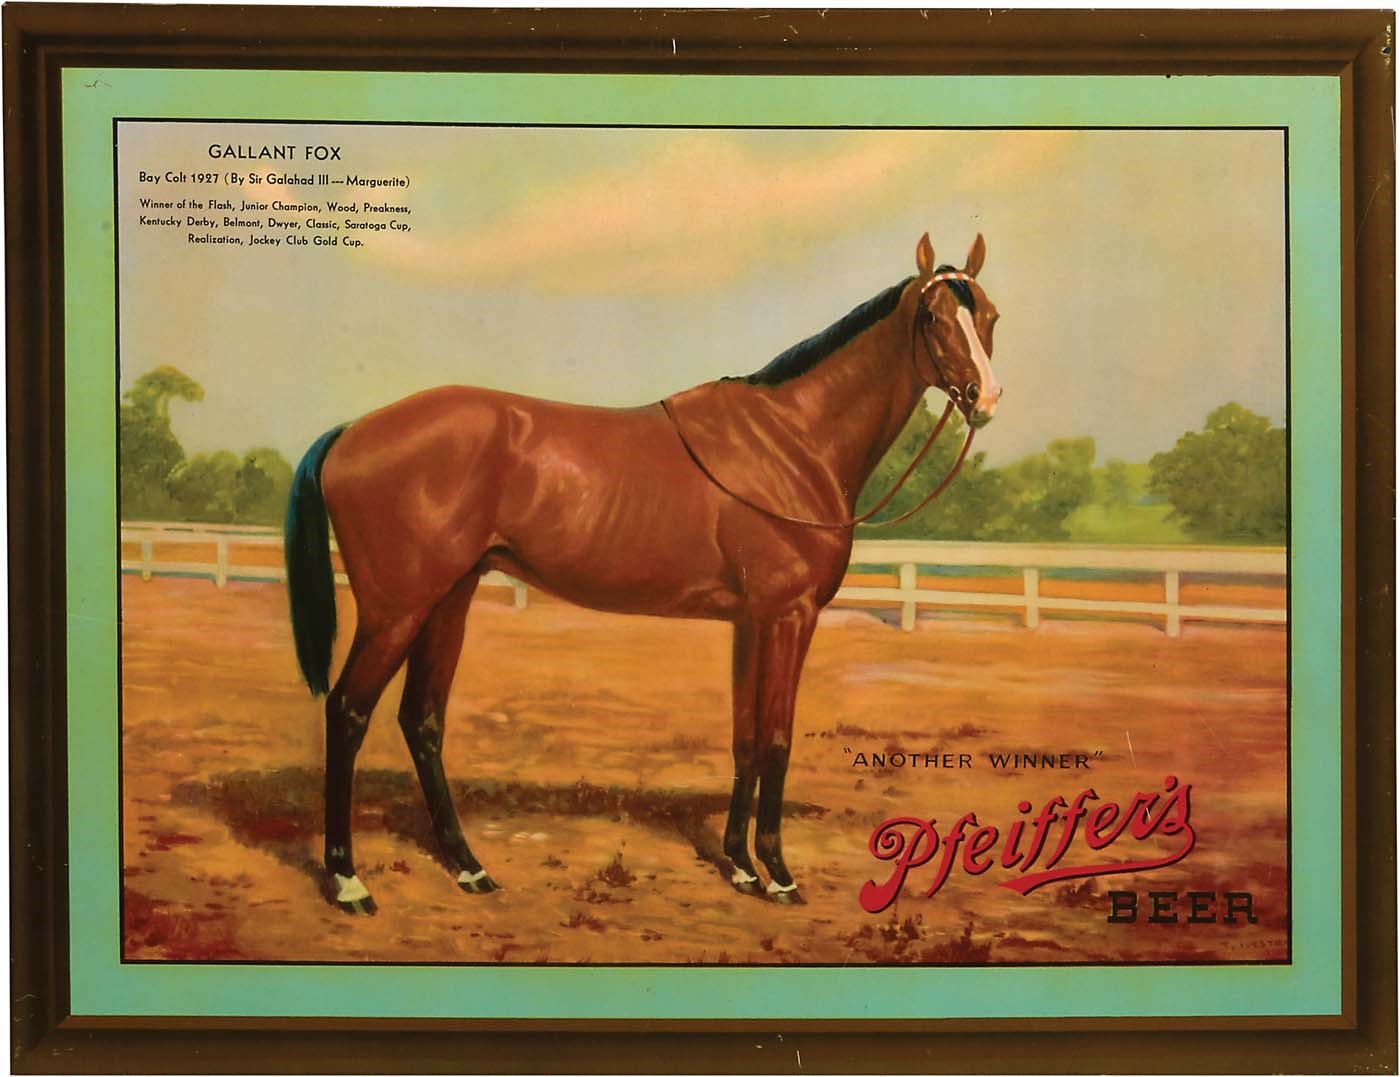 - Finest Known 1939 Gallant Fox Pfeiffer Beer Litho Tin Sign